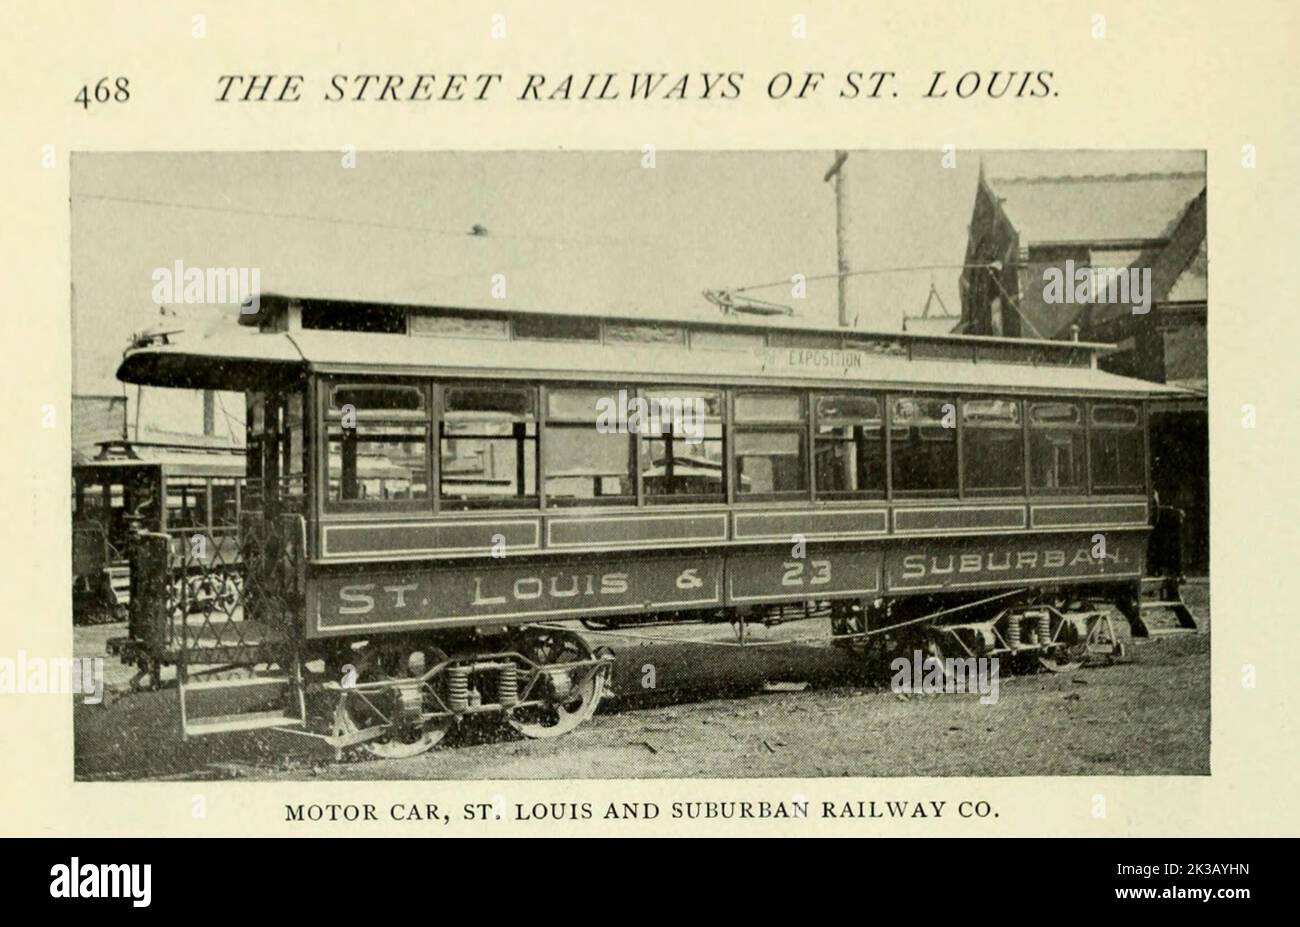 MOTOR CAR, ST. LOUIS AND SUBURBAN RAILWAY CO from the Article THE STREET RAILWAYS OF ST. LOUIS, Missouri By William H. Bryan, M. E. from The Engineering Magazine DEVOTED TO INDUSTRIAL PROGRESS Volume VIII April to September, 1895 NEW YORK The Engineering Magazine Co Stock Photo